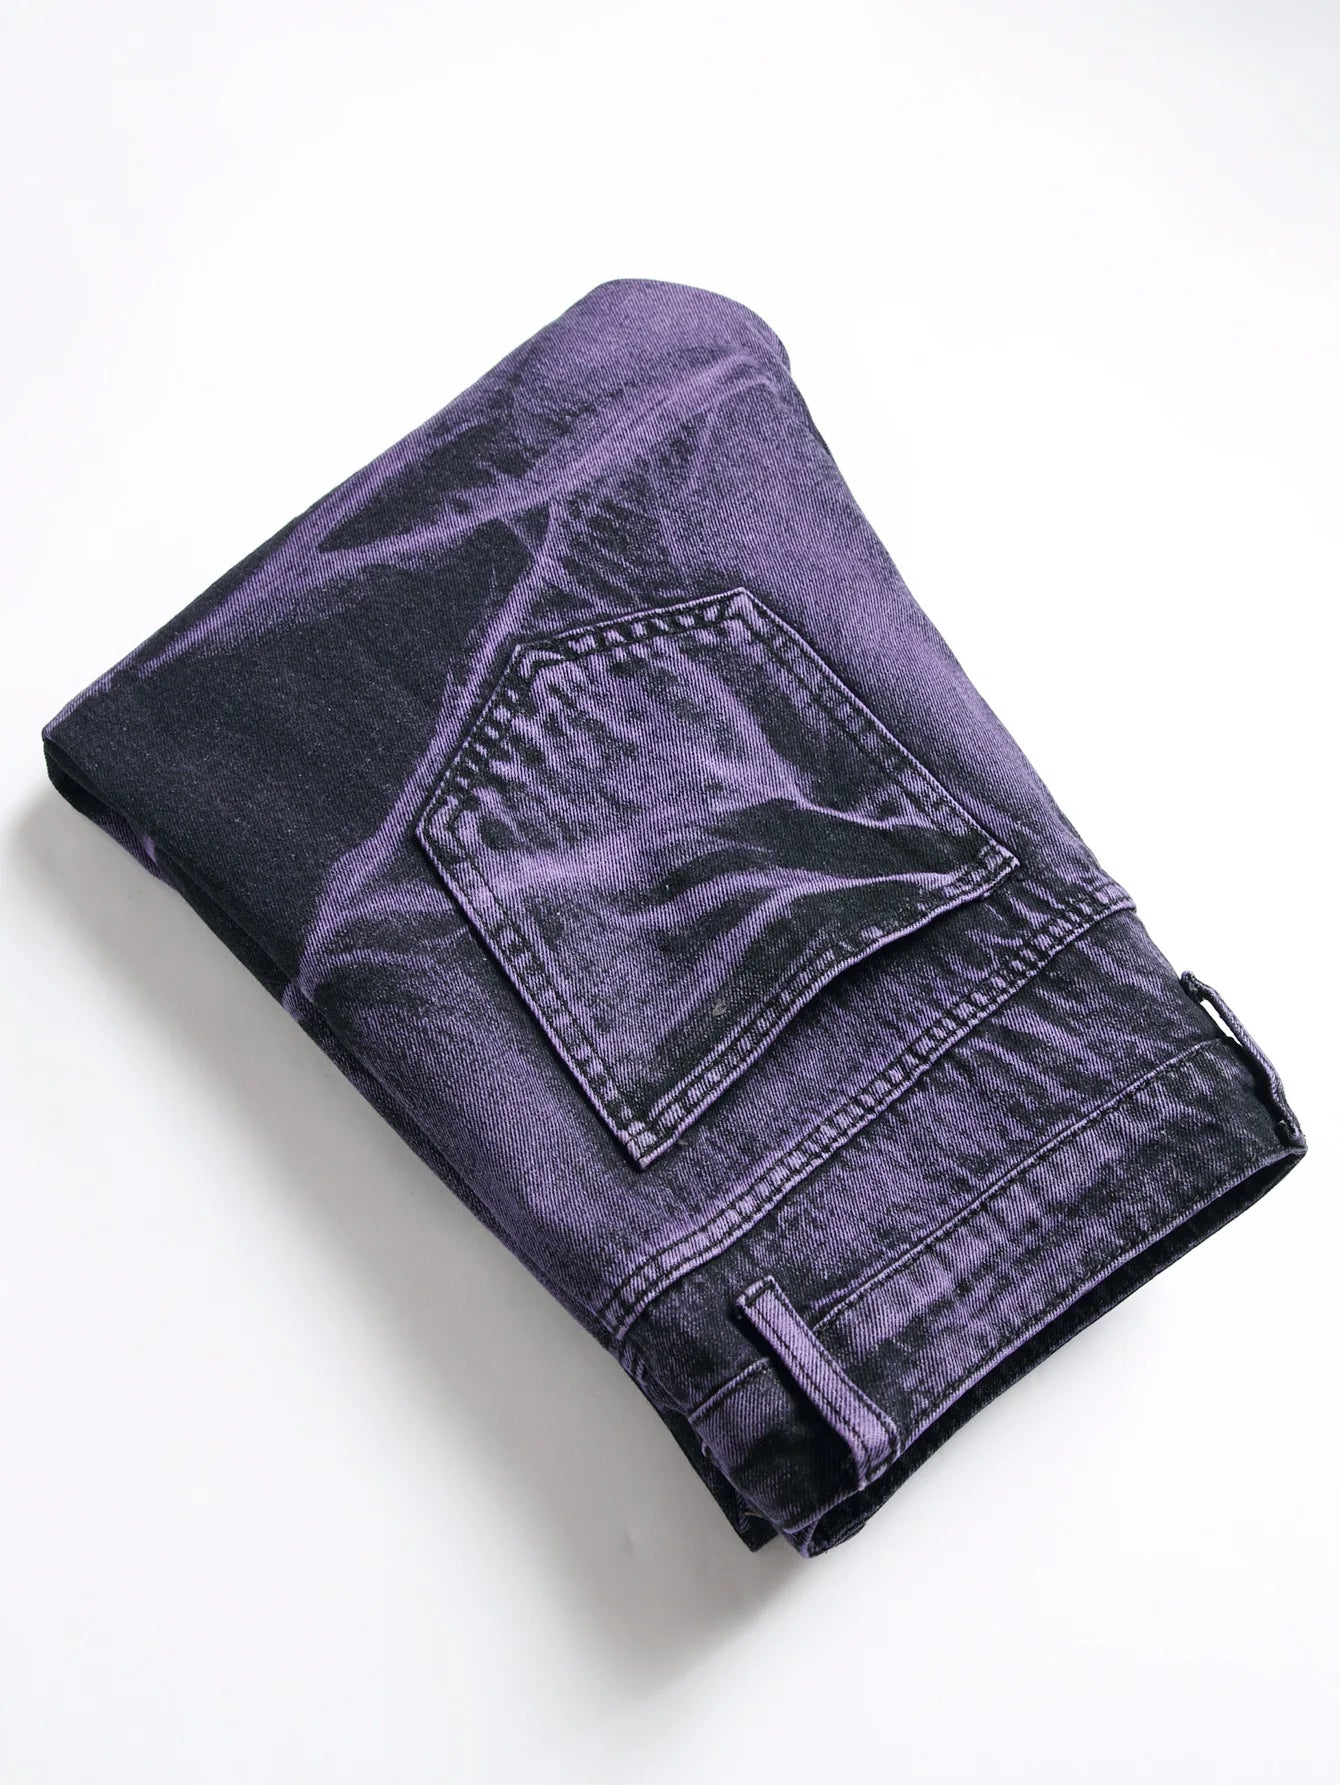 Ripped Black Purple Jeans For Men - Rahbeel